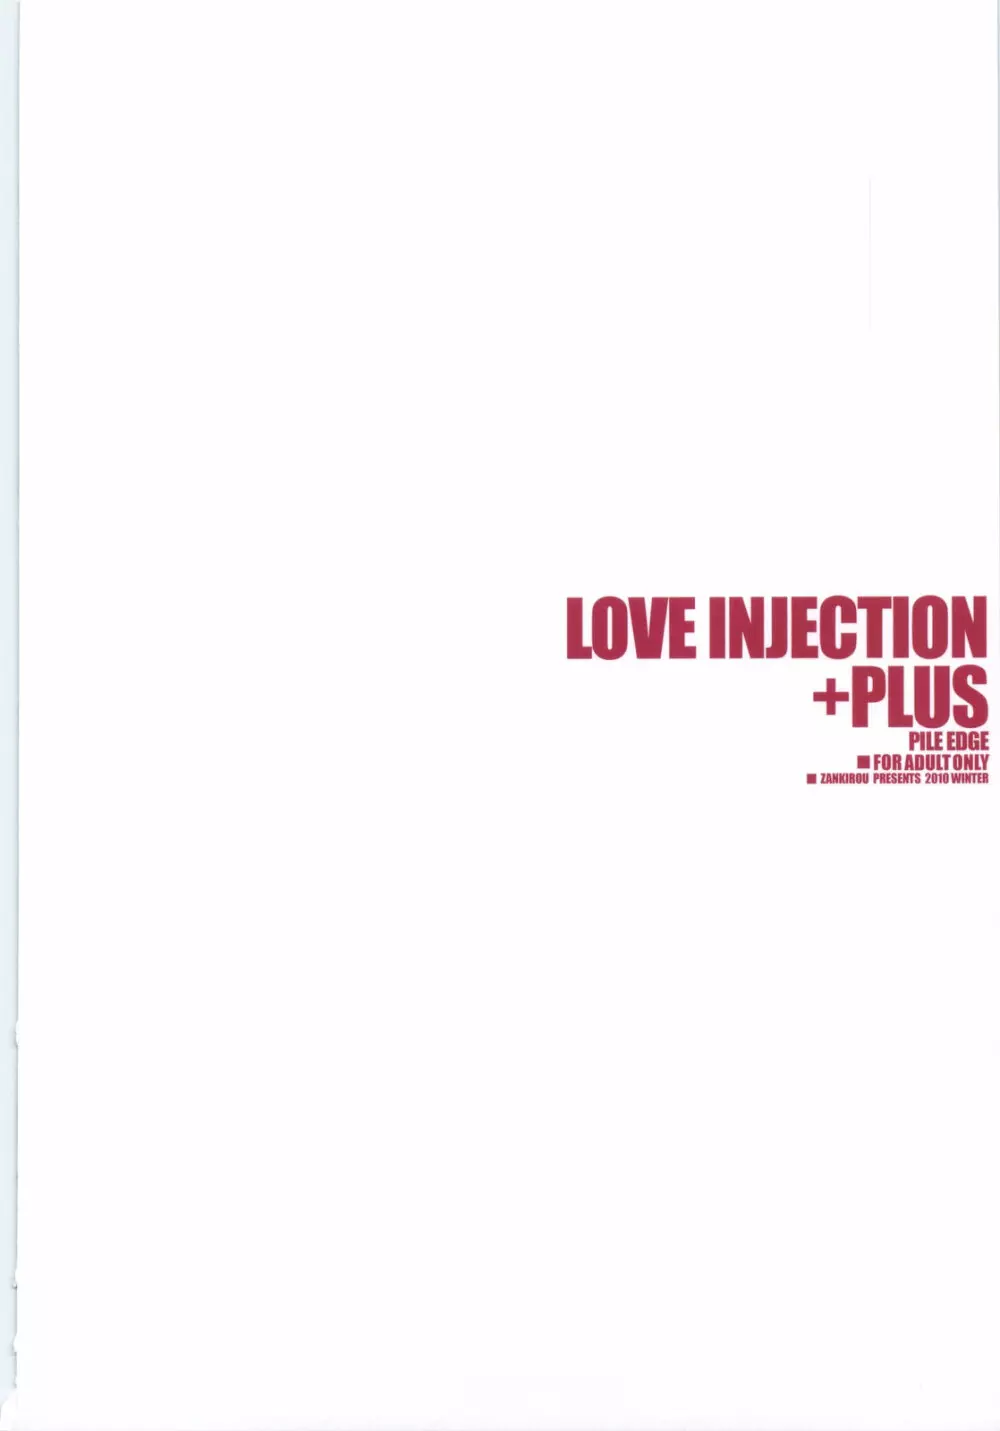 PILE EDGE LOVE INJECTION +PLUS - page24